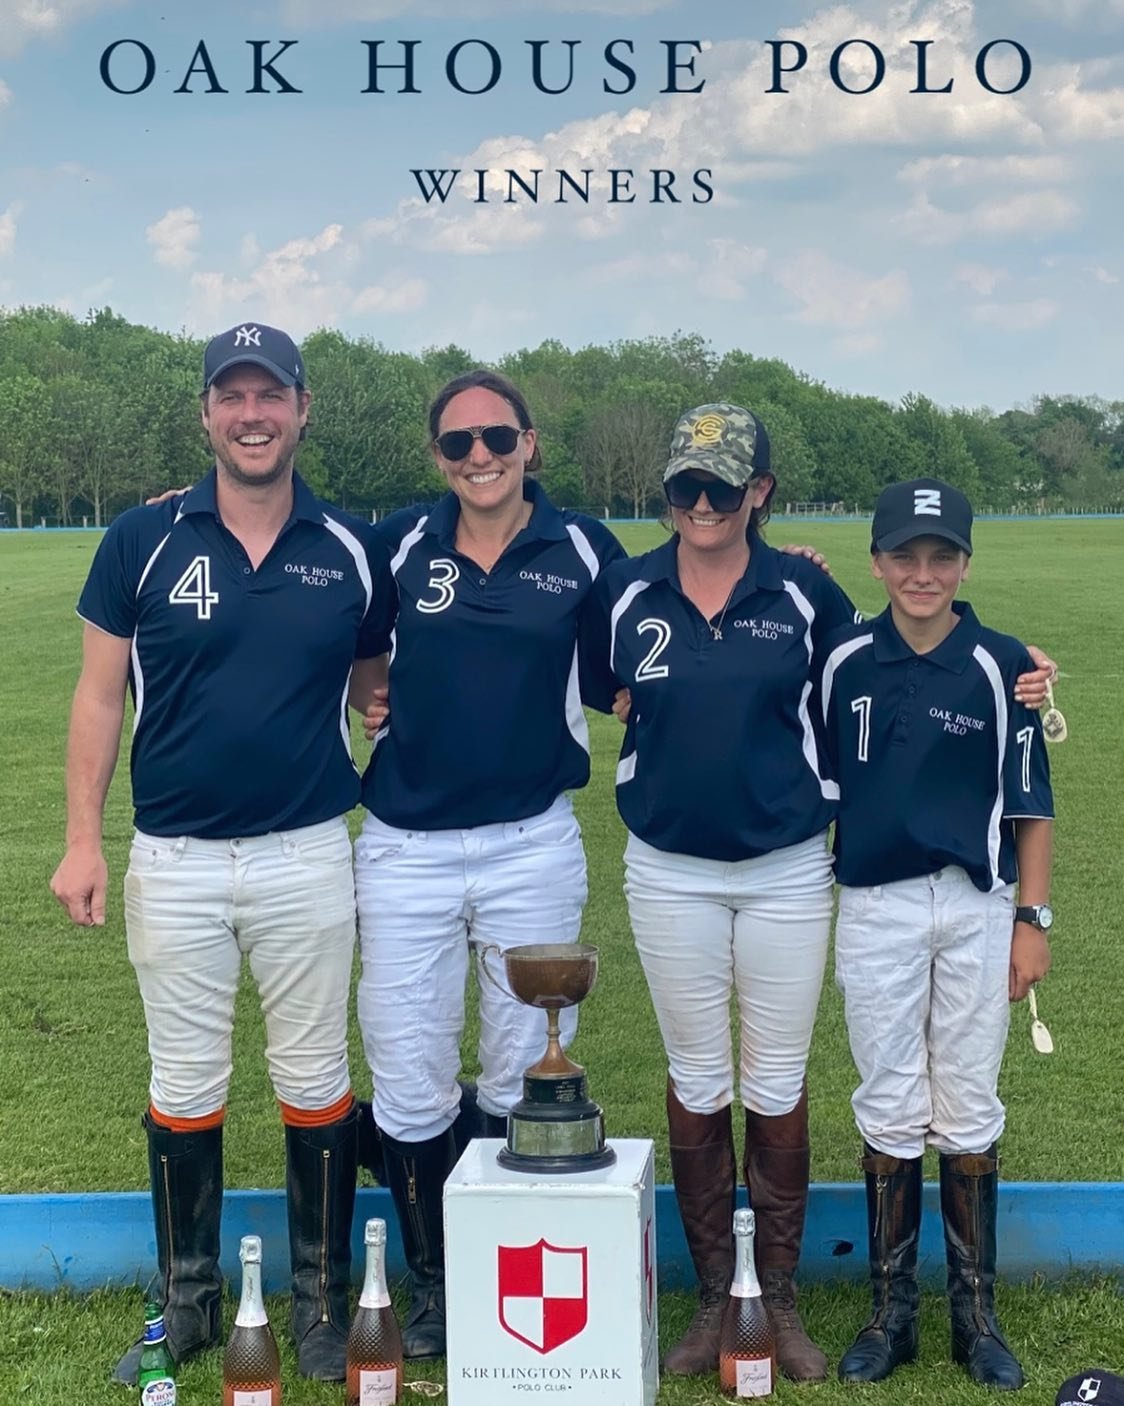 First win on the board for the yard this season. 💪💪💪

Oak House Polo take the 2 goal Ragley Cup with a cracking final against Wildebeest.

Alex Hancock
Sarah Hughes
Ripper Rippon
Lolo Fontanarossa

Ponies very pleased to be out and feeling tip top